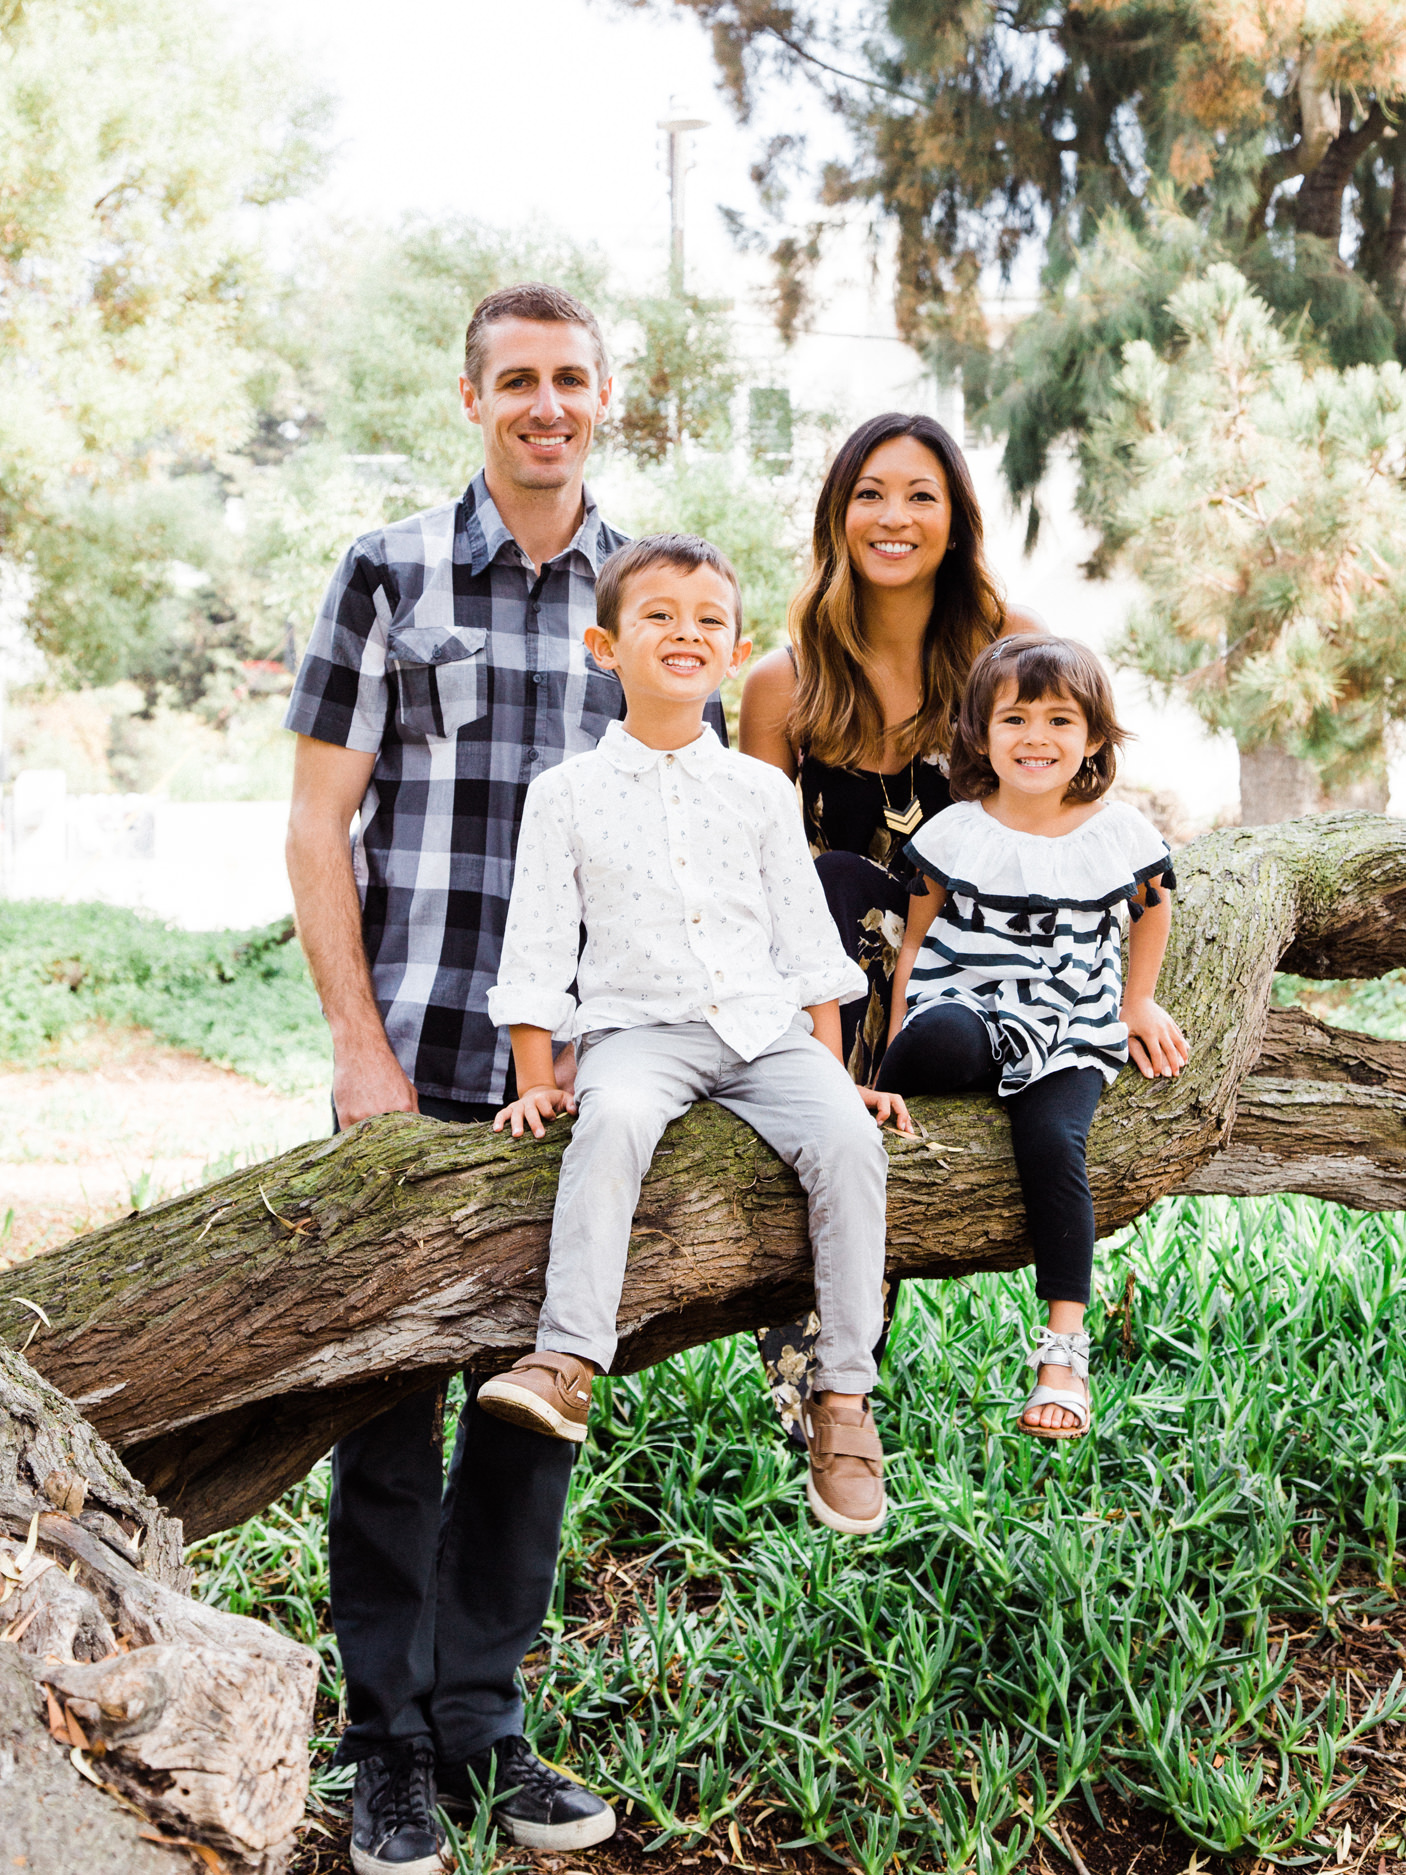  Valley Park Hermosa Beach Valley Park Hermosa Beach Family Portrait Photographs and Valley Park Hermosa Beach Family Portrait Photography from Fine Art Family Portrait Photographer, engagement photographer and Wedding Photographer Daniel Doty Photog